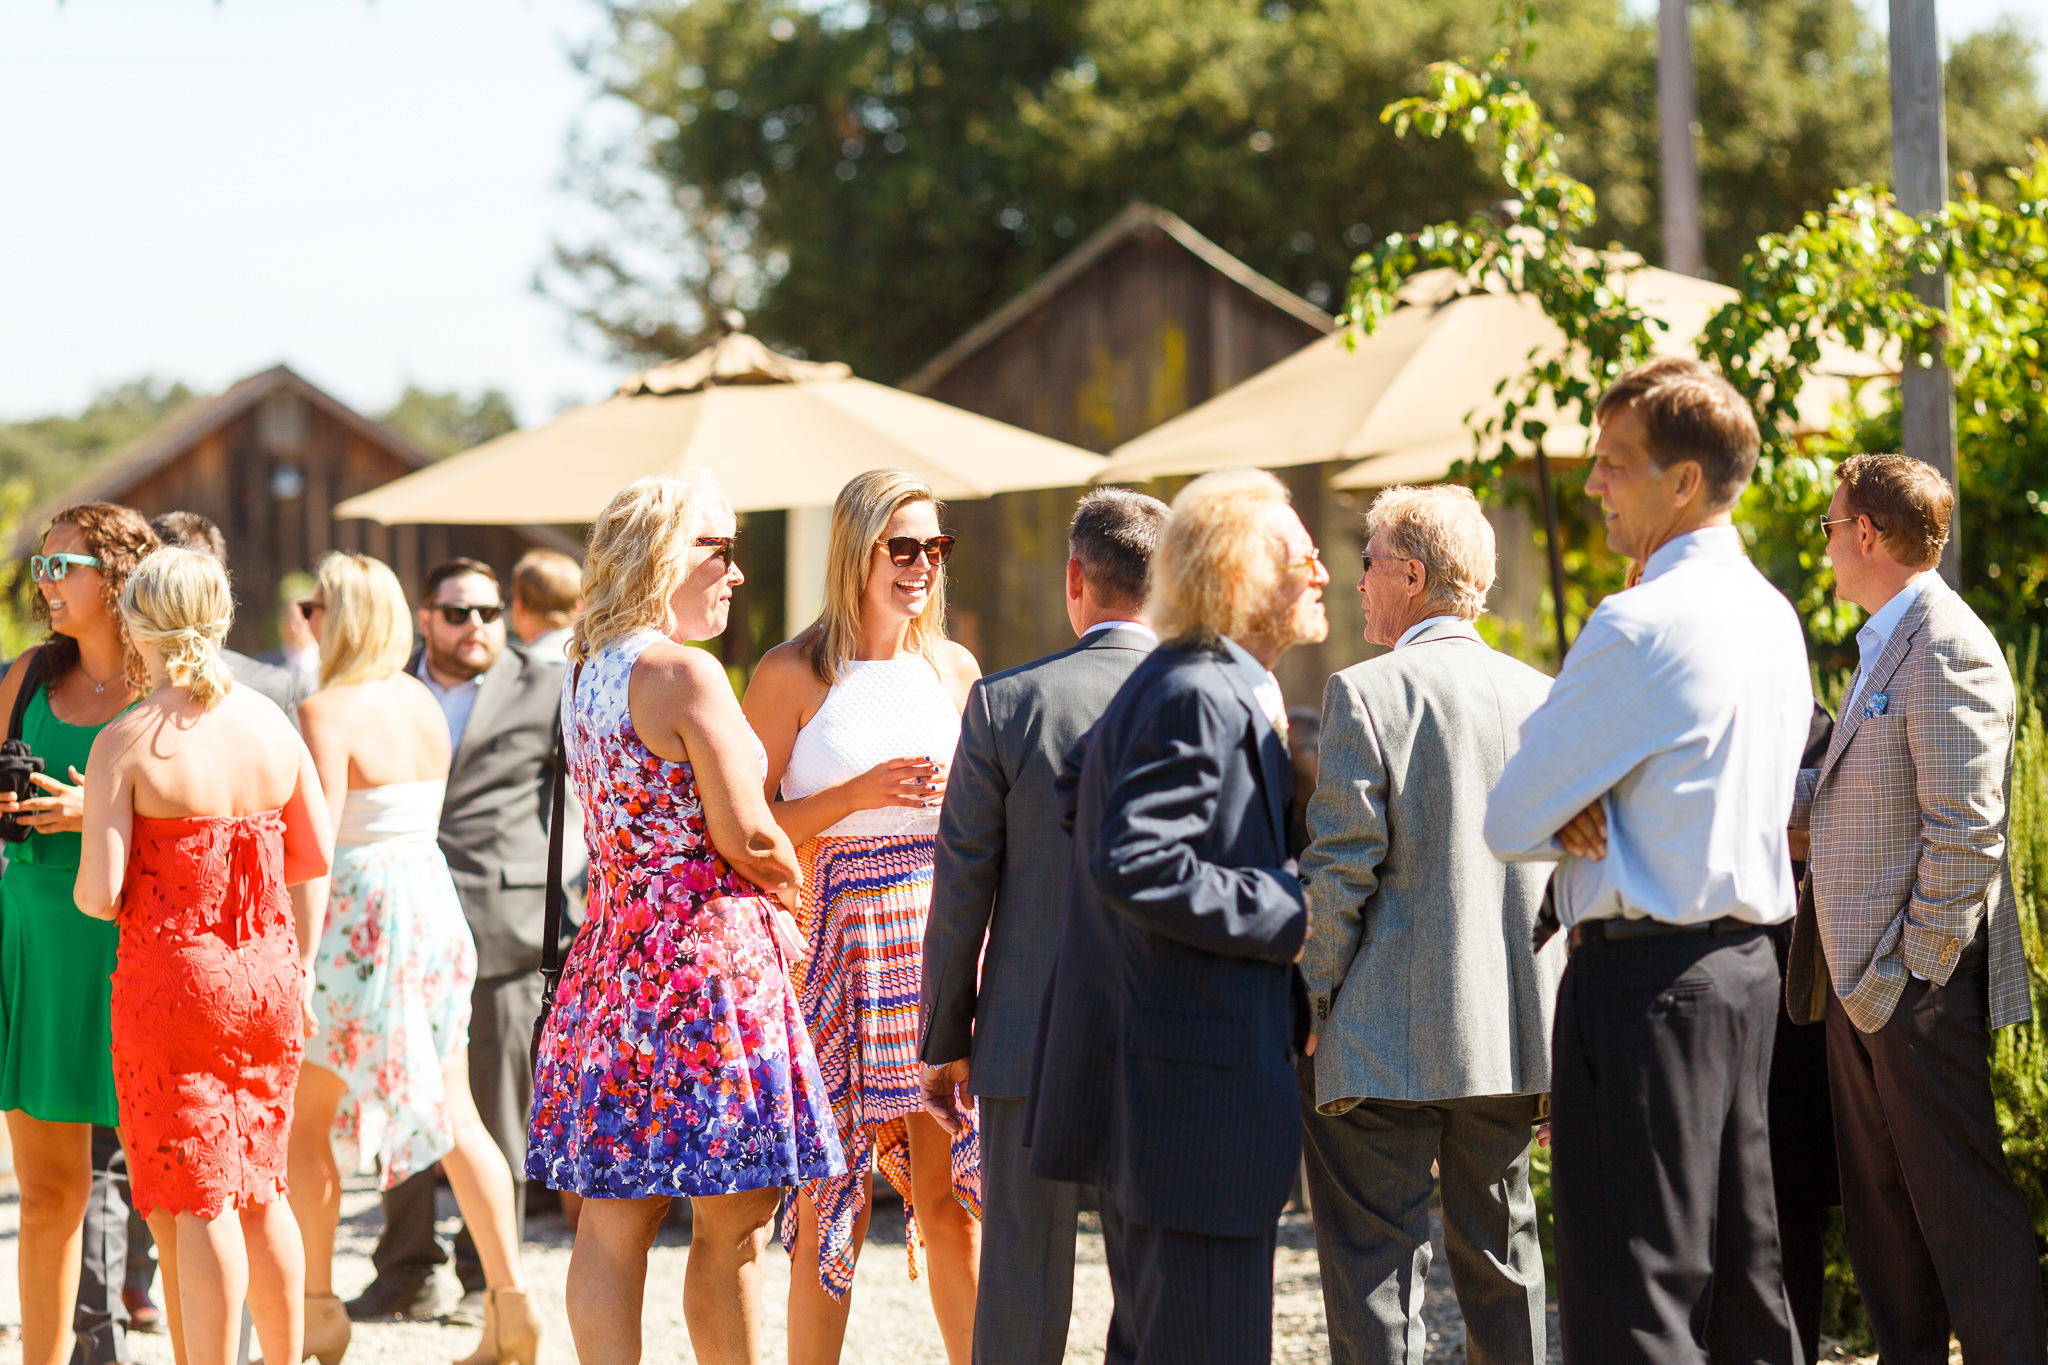 Guests mingling after the ceremony at Dana Powers Barn